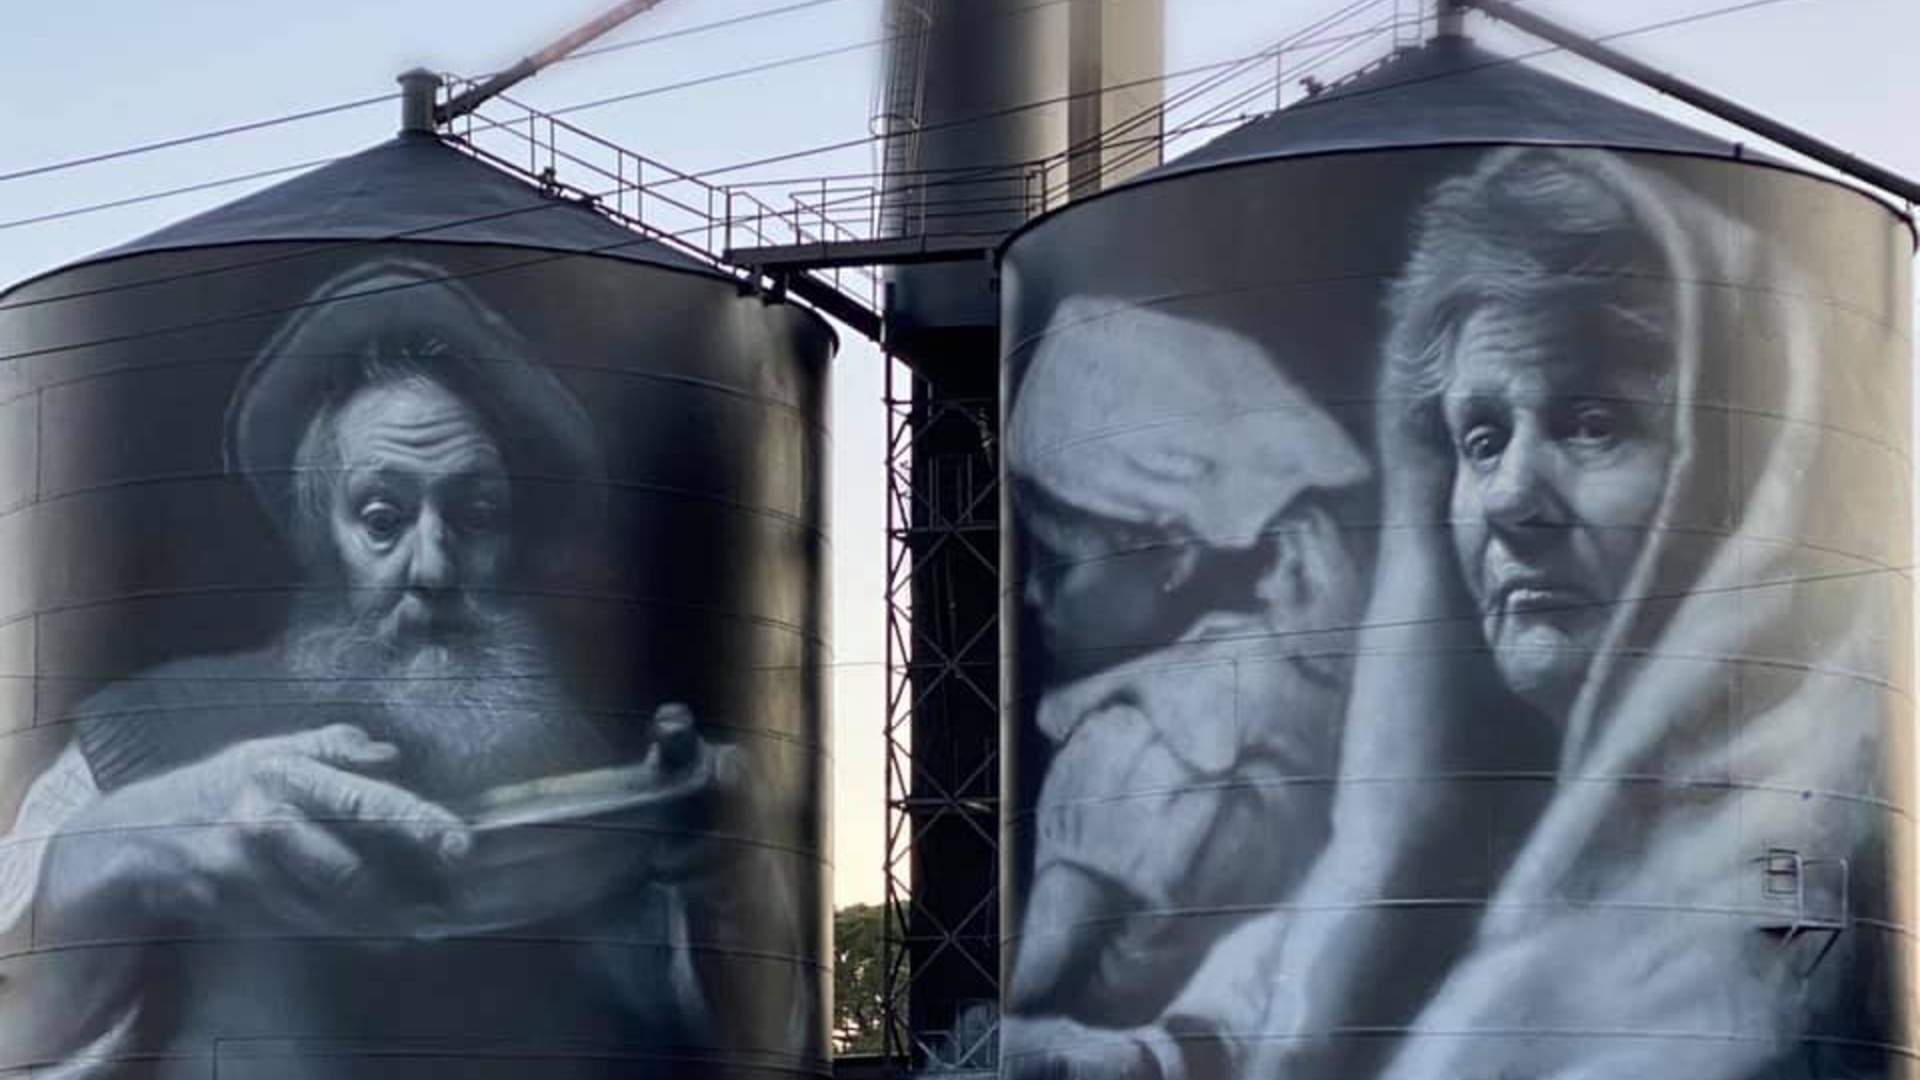 This New Grampians 'Hope' Mural Is the Latest Addition to Victoria's Silo Art Trail